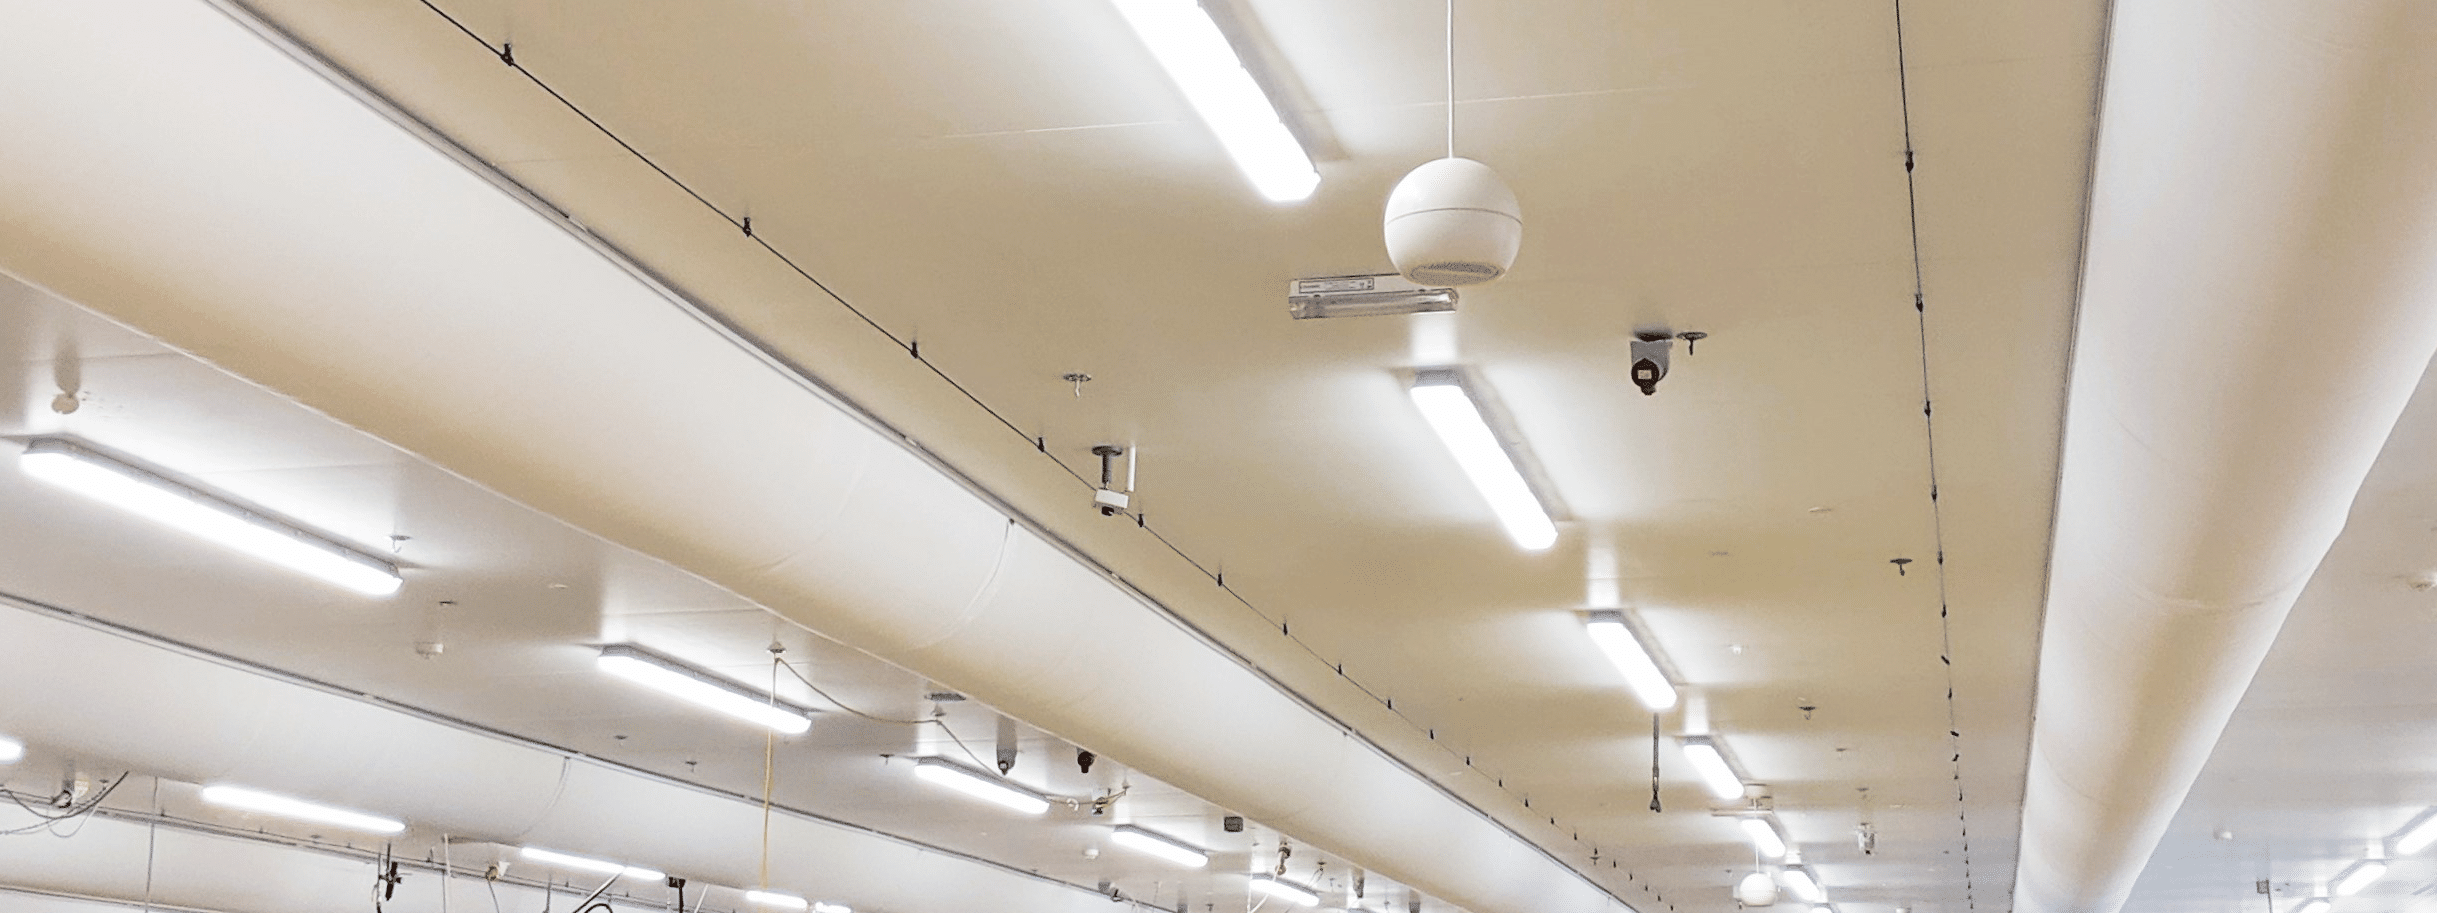 Hygienic fabric ducts in a food factory